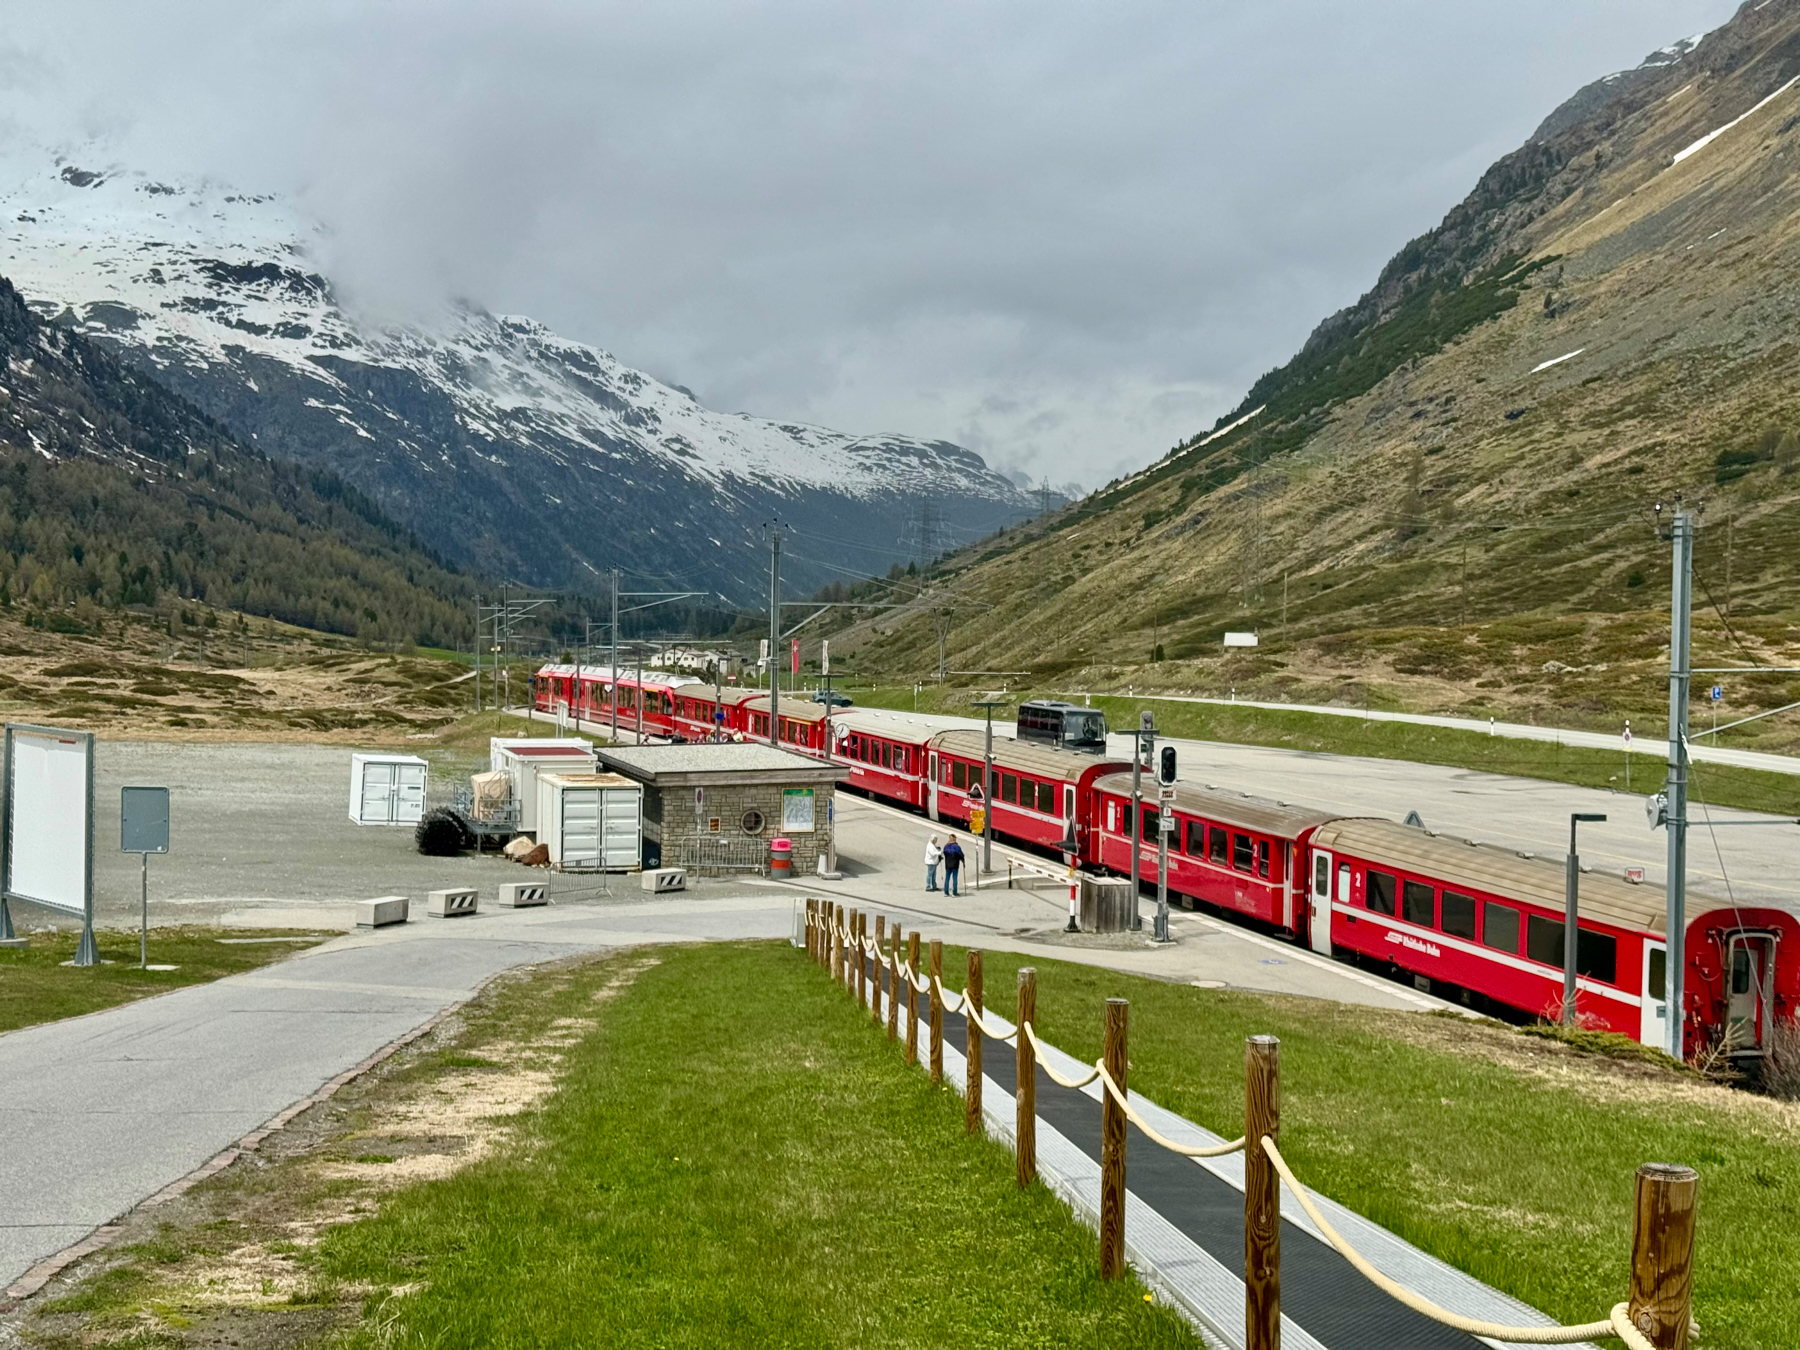 A red passenger train stationed at a platform amidst a mountainous landscape with snow-capped peaks and a grassy area in the foreground.